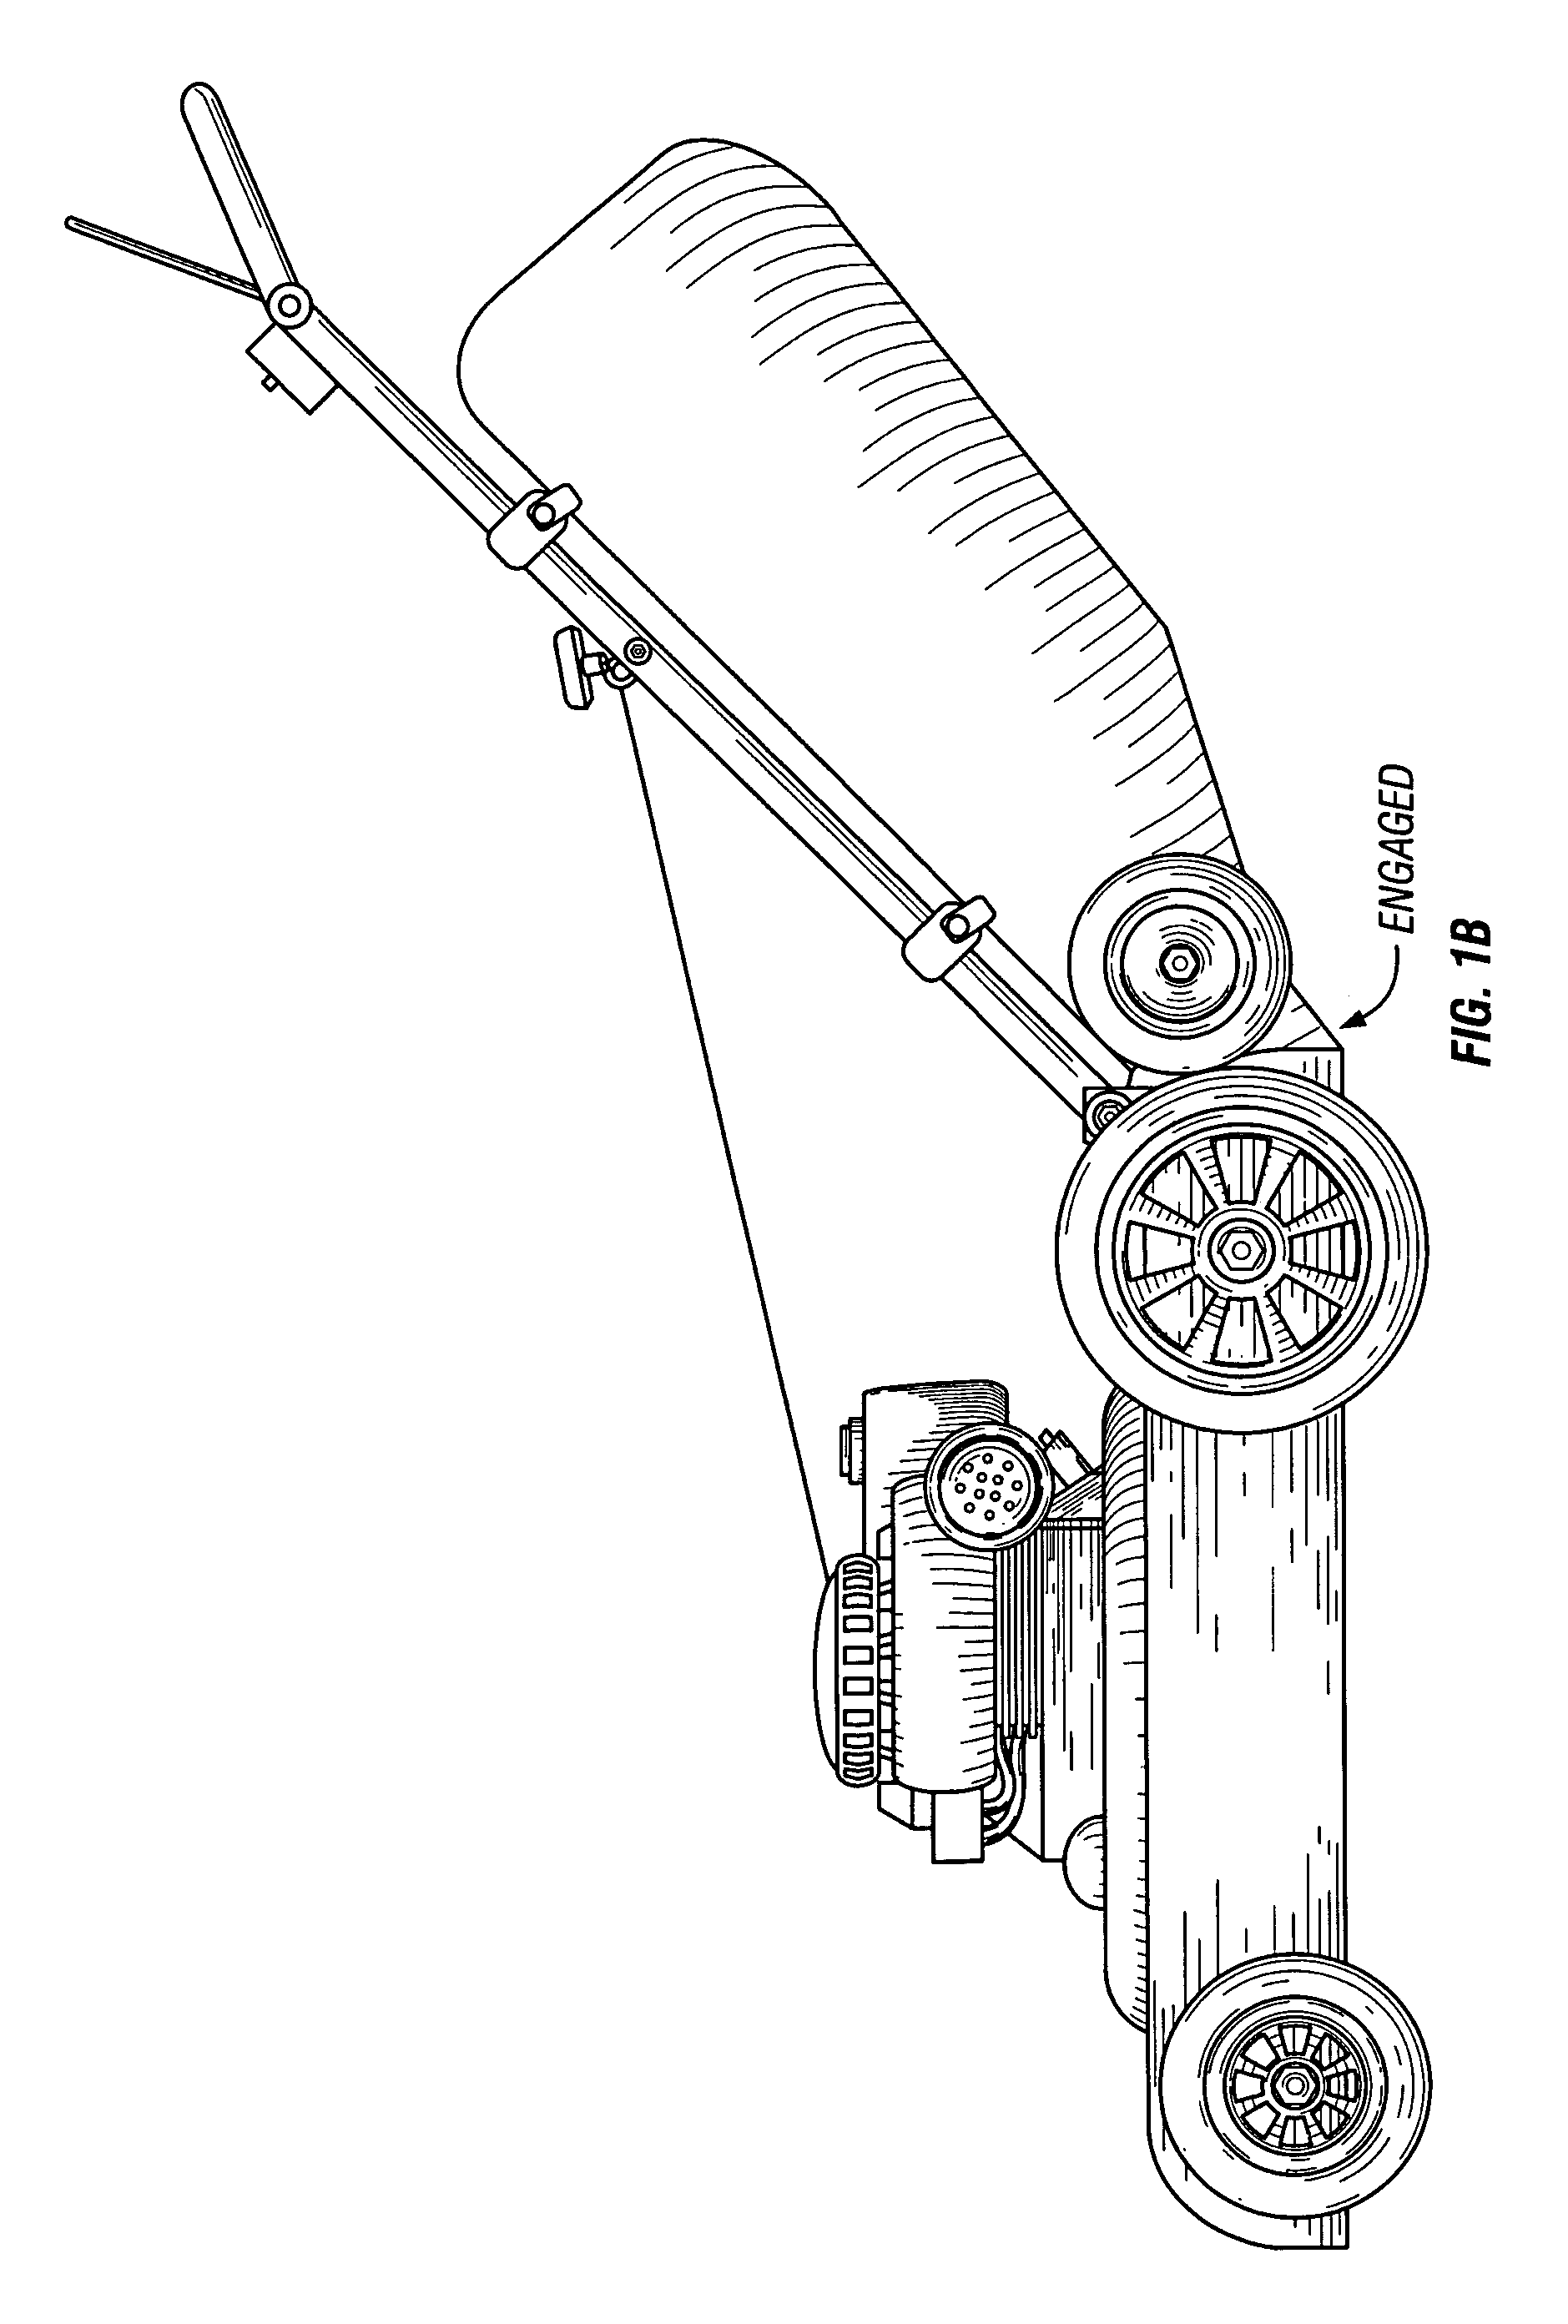 Gardening product dispensing systems and methods